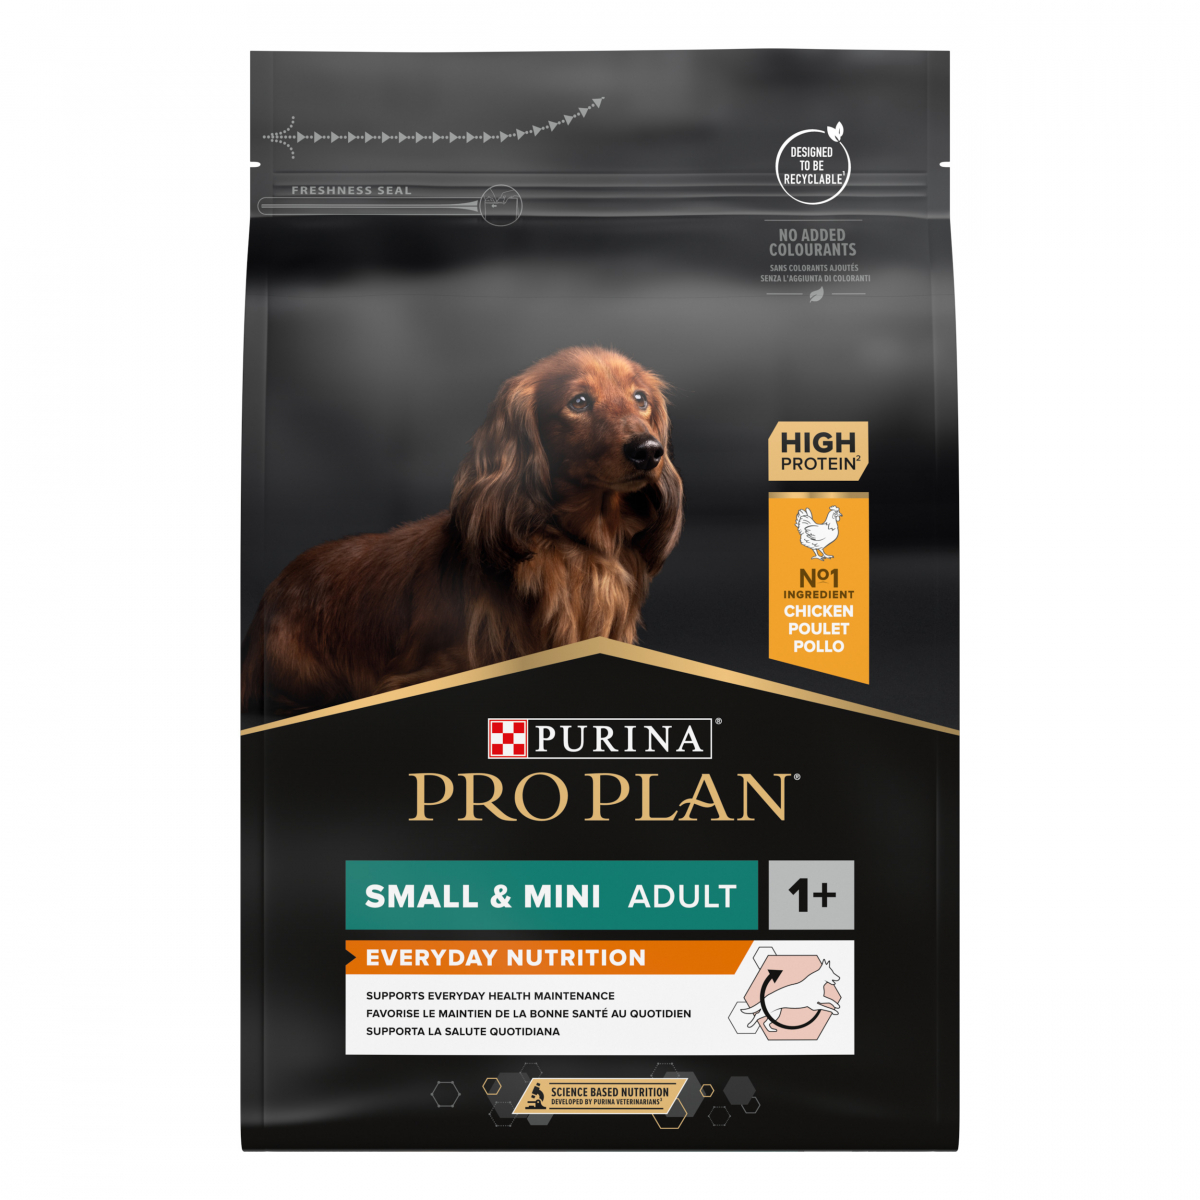 PRO PLAN Chien Small&Mini Adult Everyday Nutrition pour chien